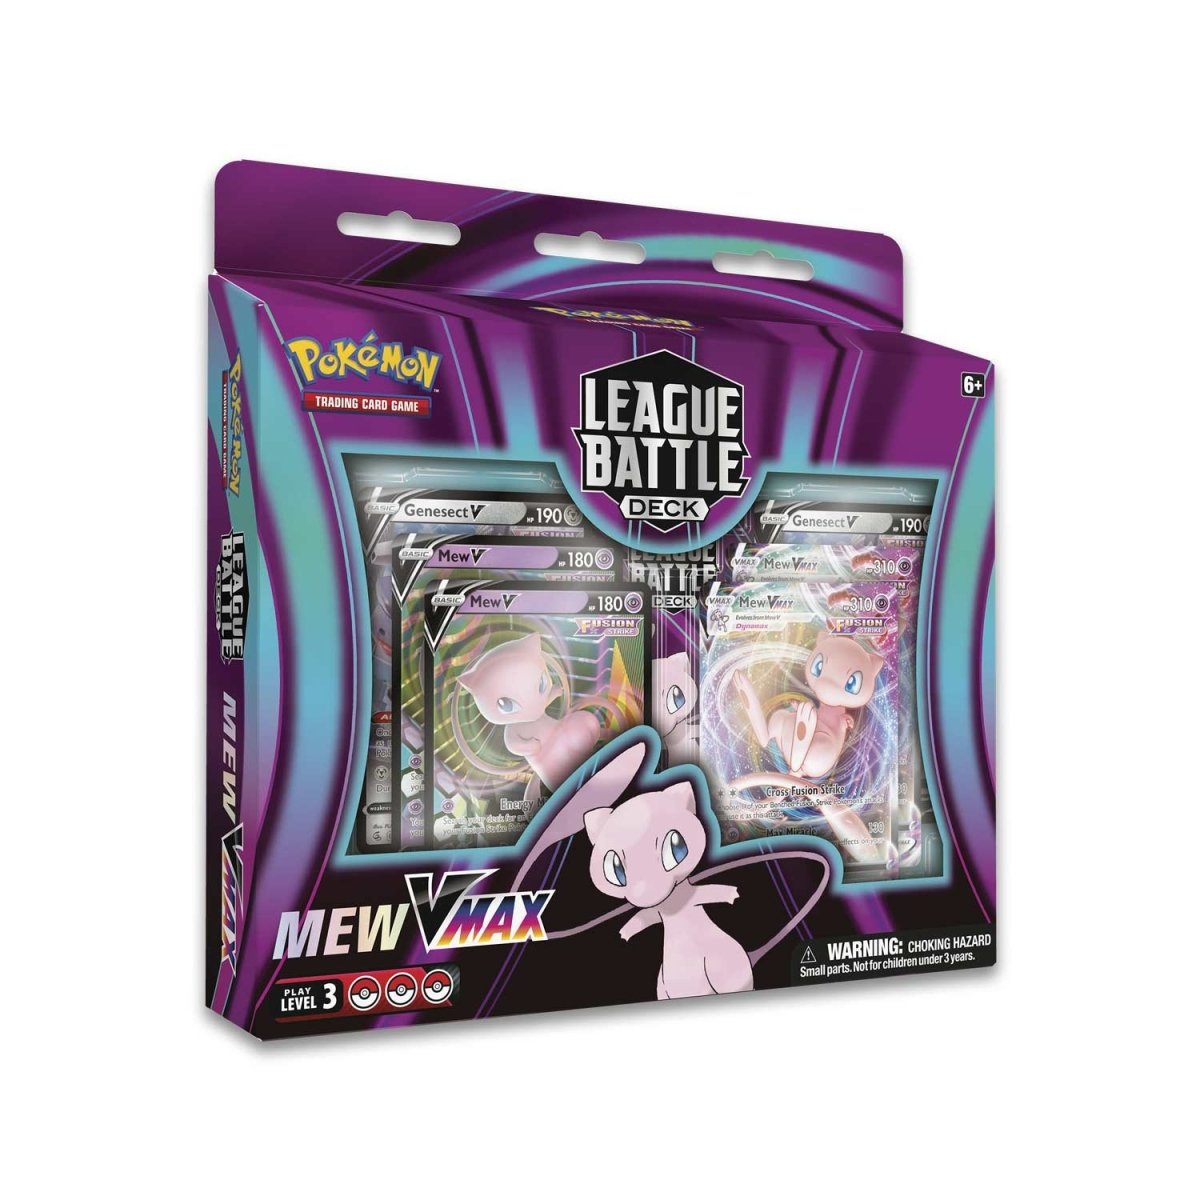 A History of Mewtwo in the Pokémon TCG